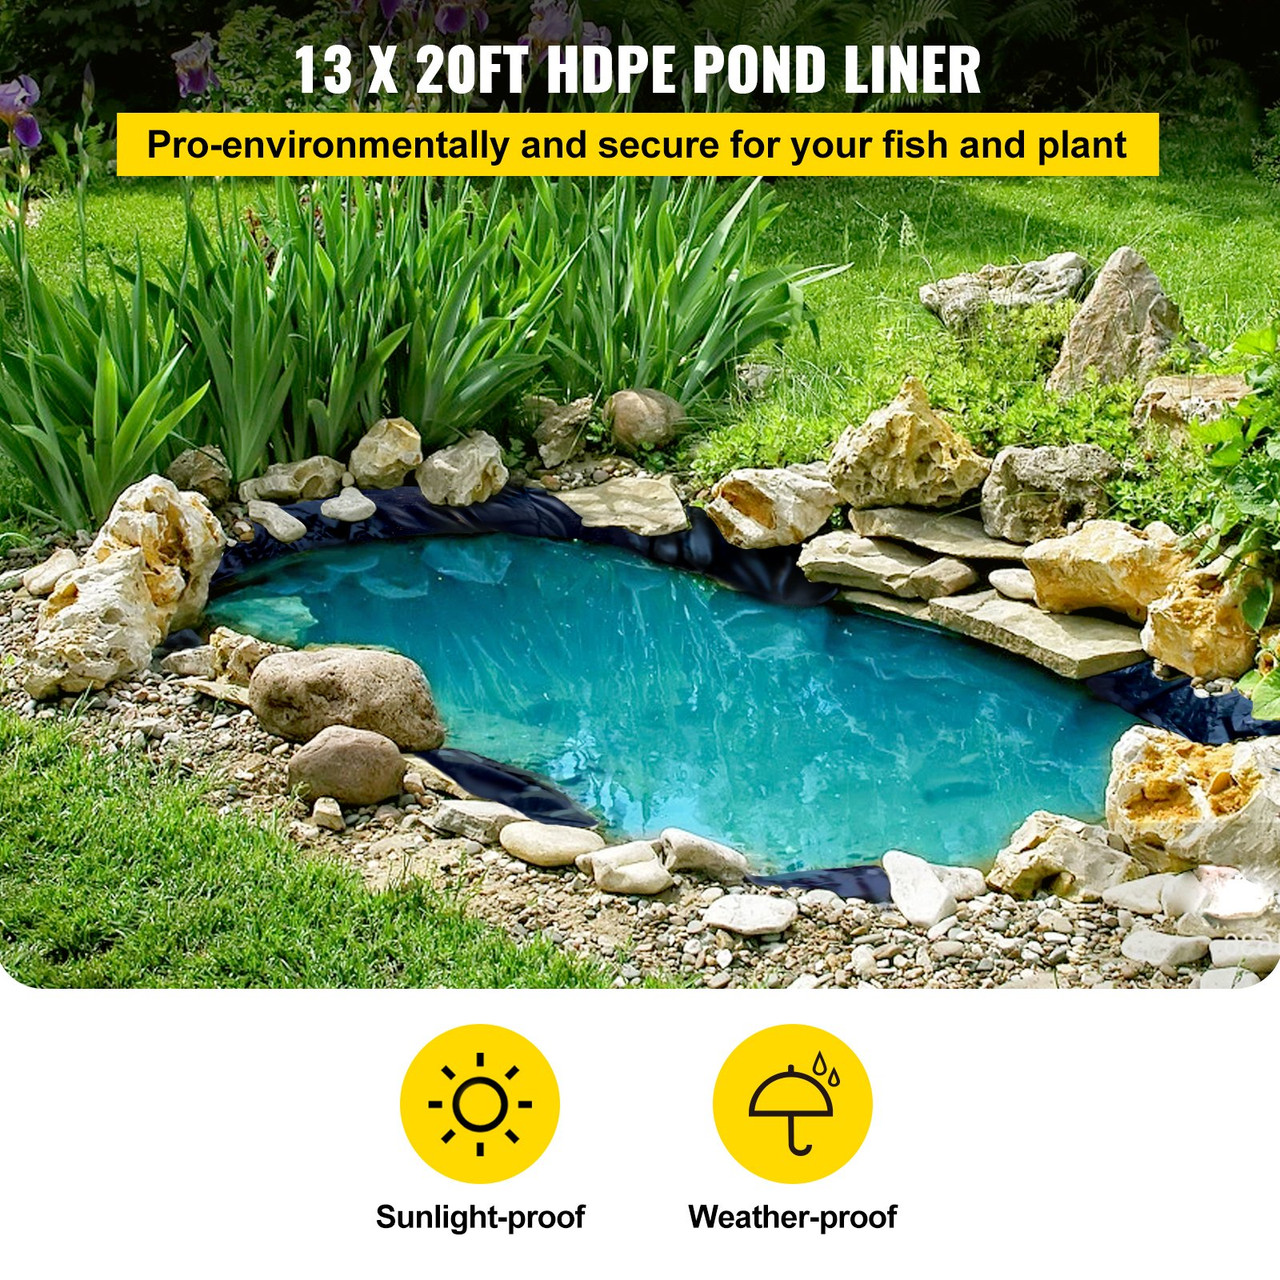 Pond Liner, 13x20 ft, 20 Mil Pond Liners for Outdoor Ponds, HDPE Pond Underlayment for Fountain, Small Pond, Fishpond, Waterfall, Water Garden, Black